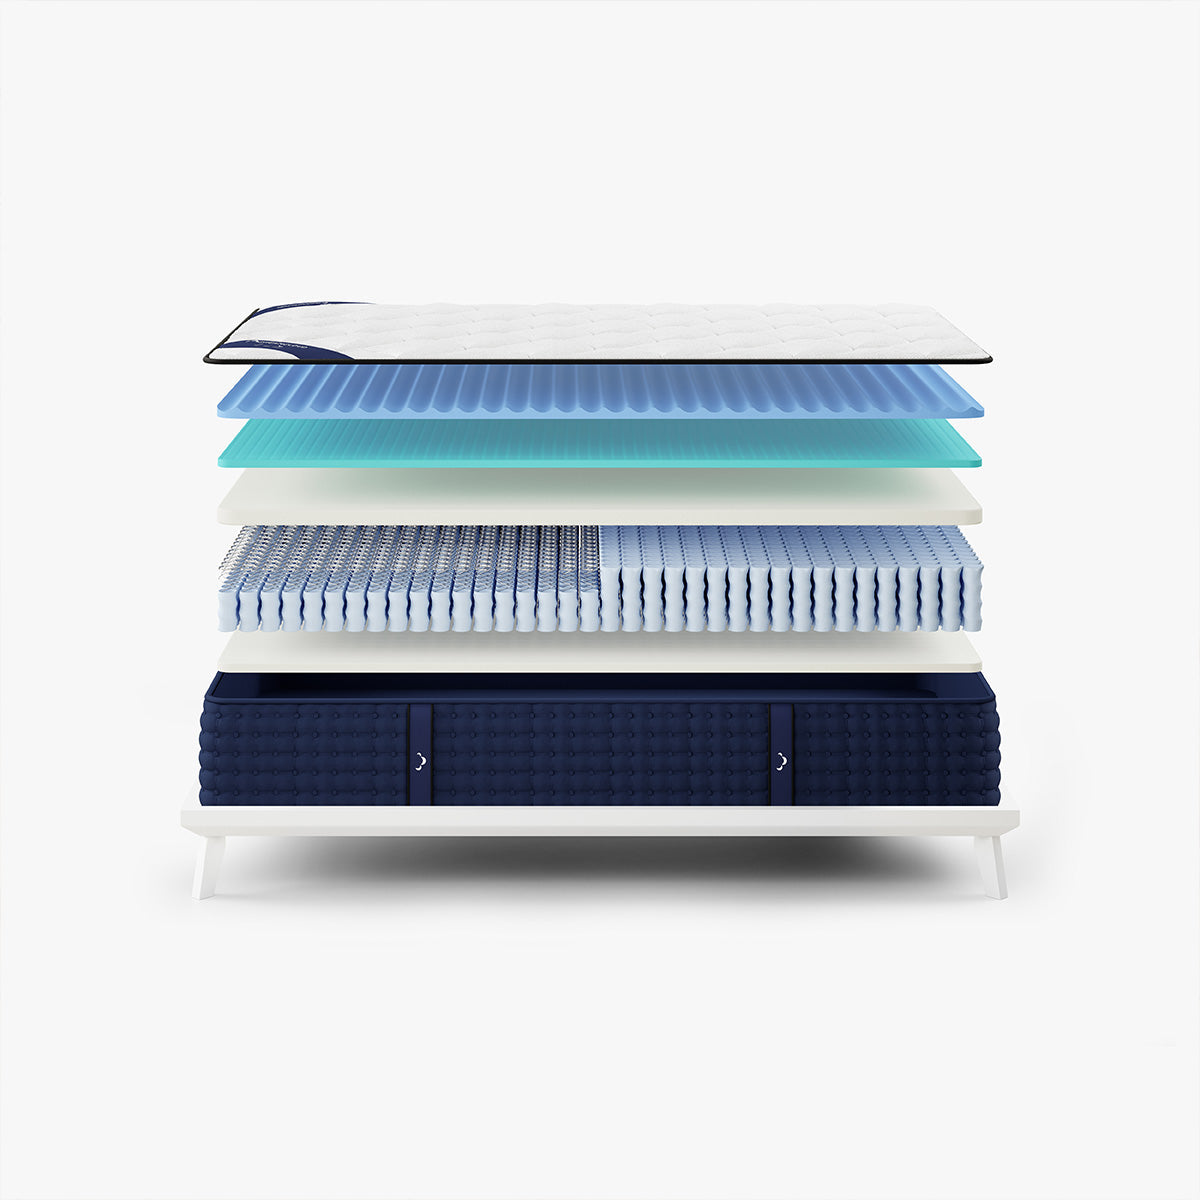 The DreamCloud Hybrid Mattress Layers Expanded